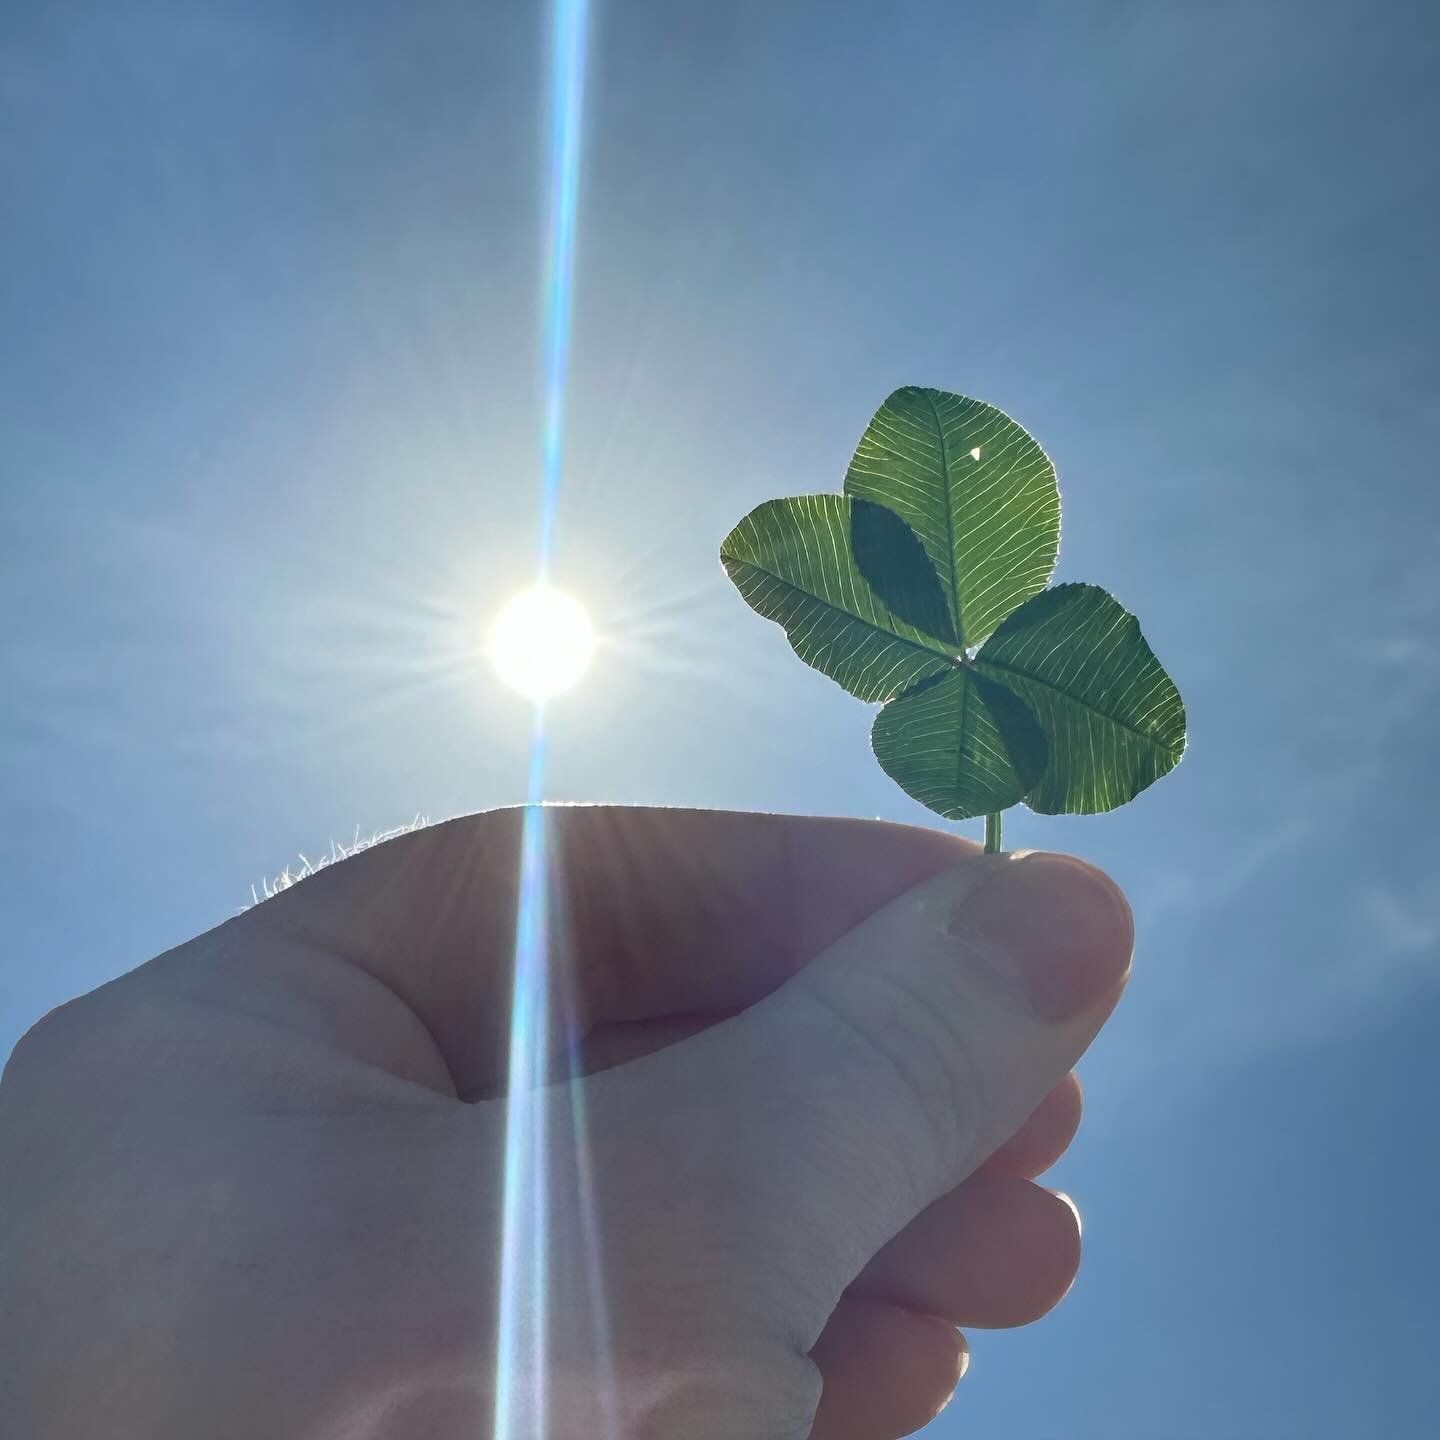 I found clovers during the solar eclipse today. My husband is a private pilot and we flew down to Carbondale, IL to experience totality. It was extraordinary. I cried. And I plan to seek out another one as soon as possible. I am truly lucky 🍀🌕☀️❤️